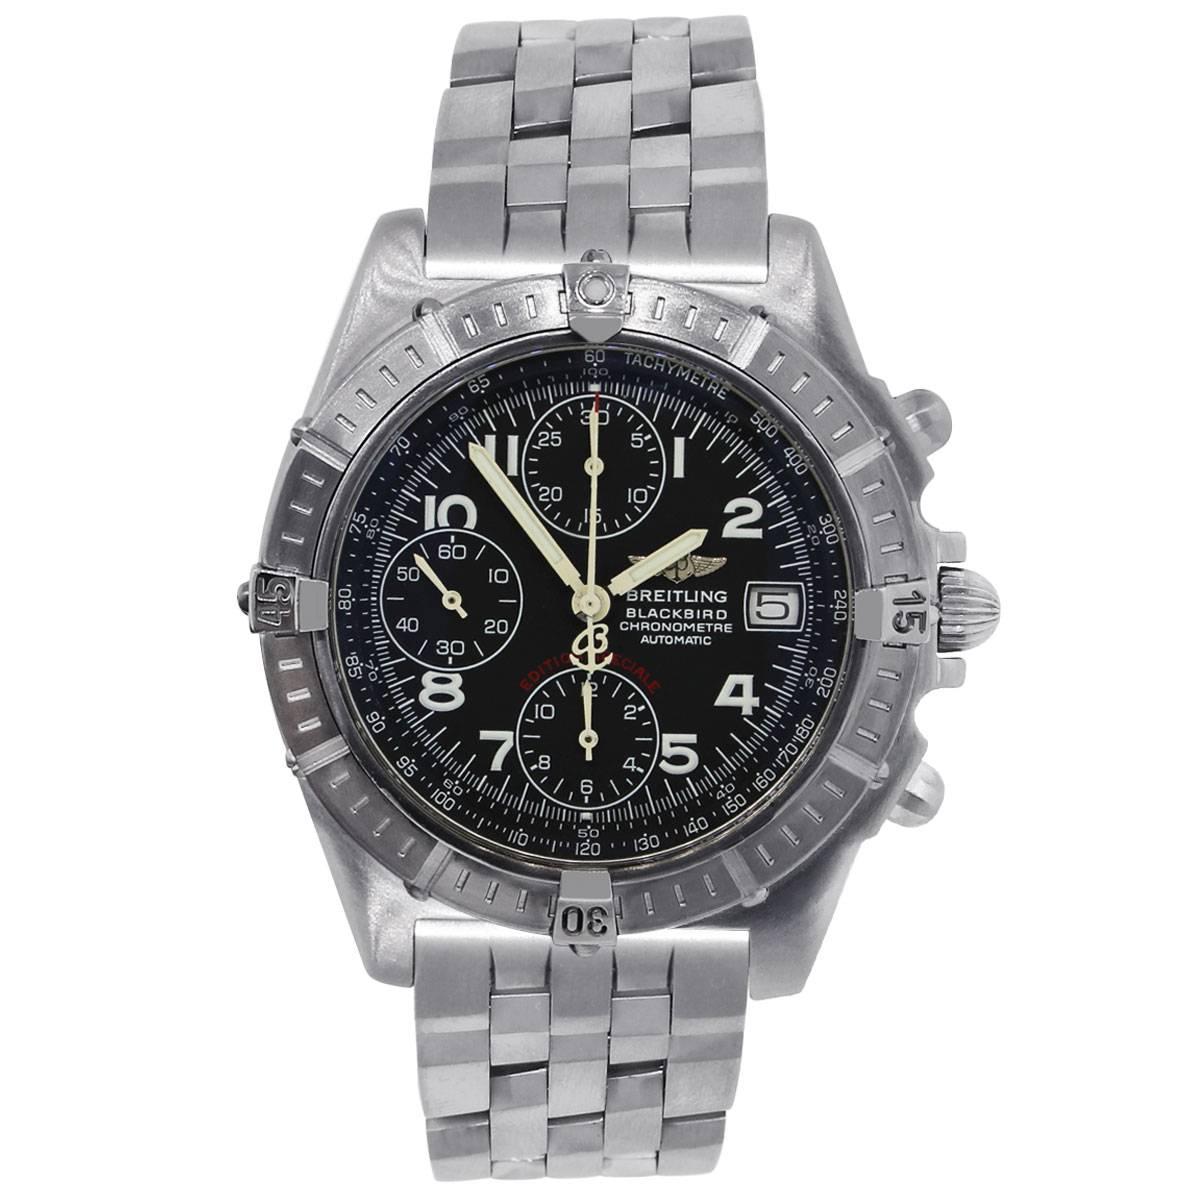 Brand: Breitling
MPN: A13353
Model: Blackbird Edition Speciale
Case Material: Stainless Steel
Case Diameter: 40mm
Crystal: AR coated scratch resistant sapphire crystal
Bezel: Stainless steel unidirectional bezel
Dial: Black chronograph dial with